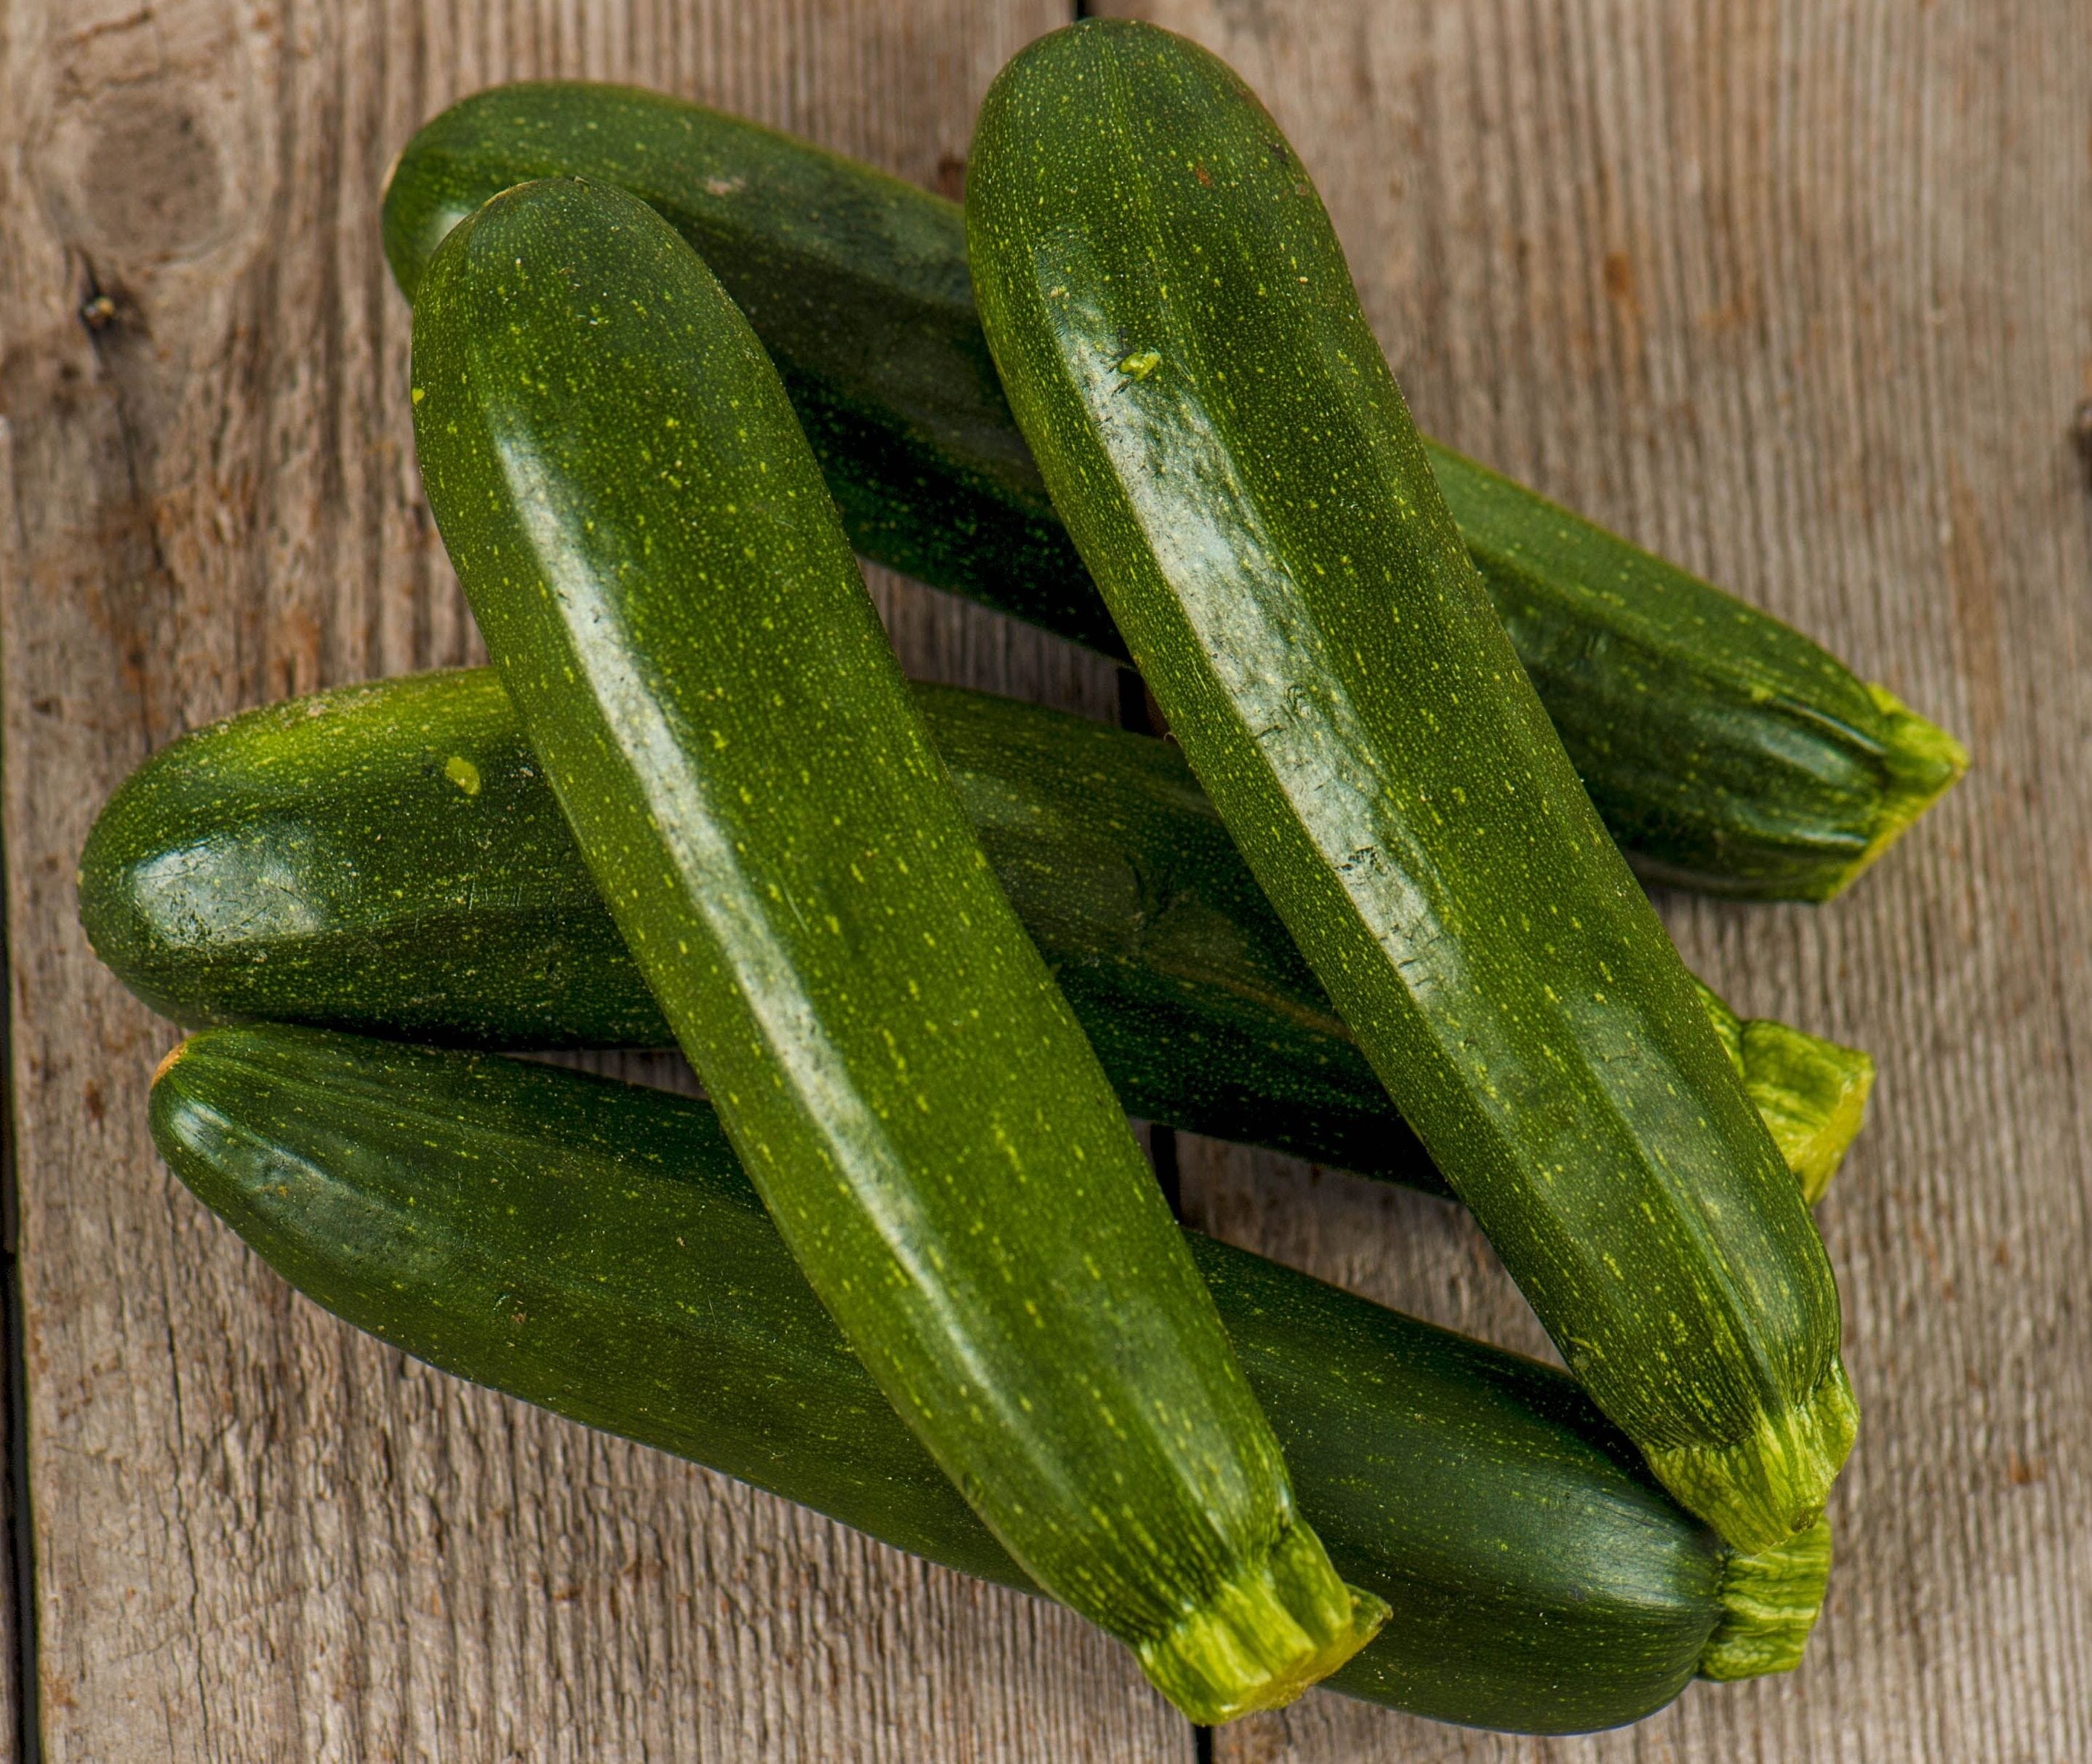 Heat can squash your zucchini before it fruits. Here is what to do